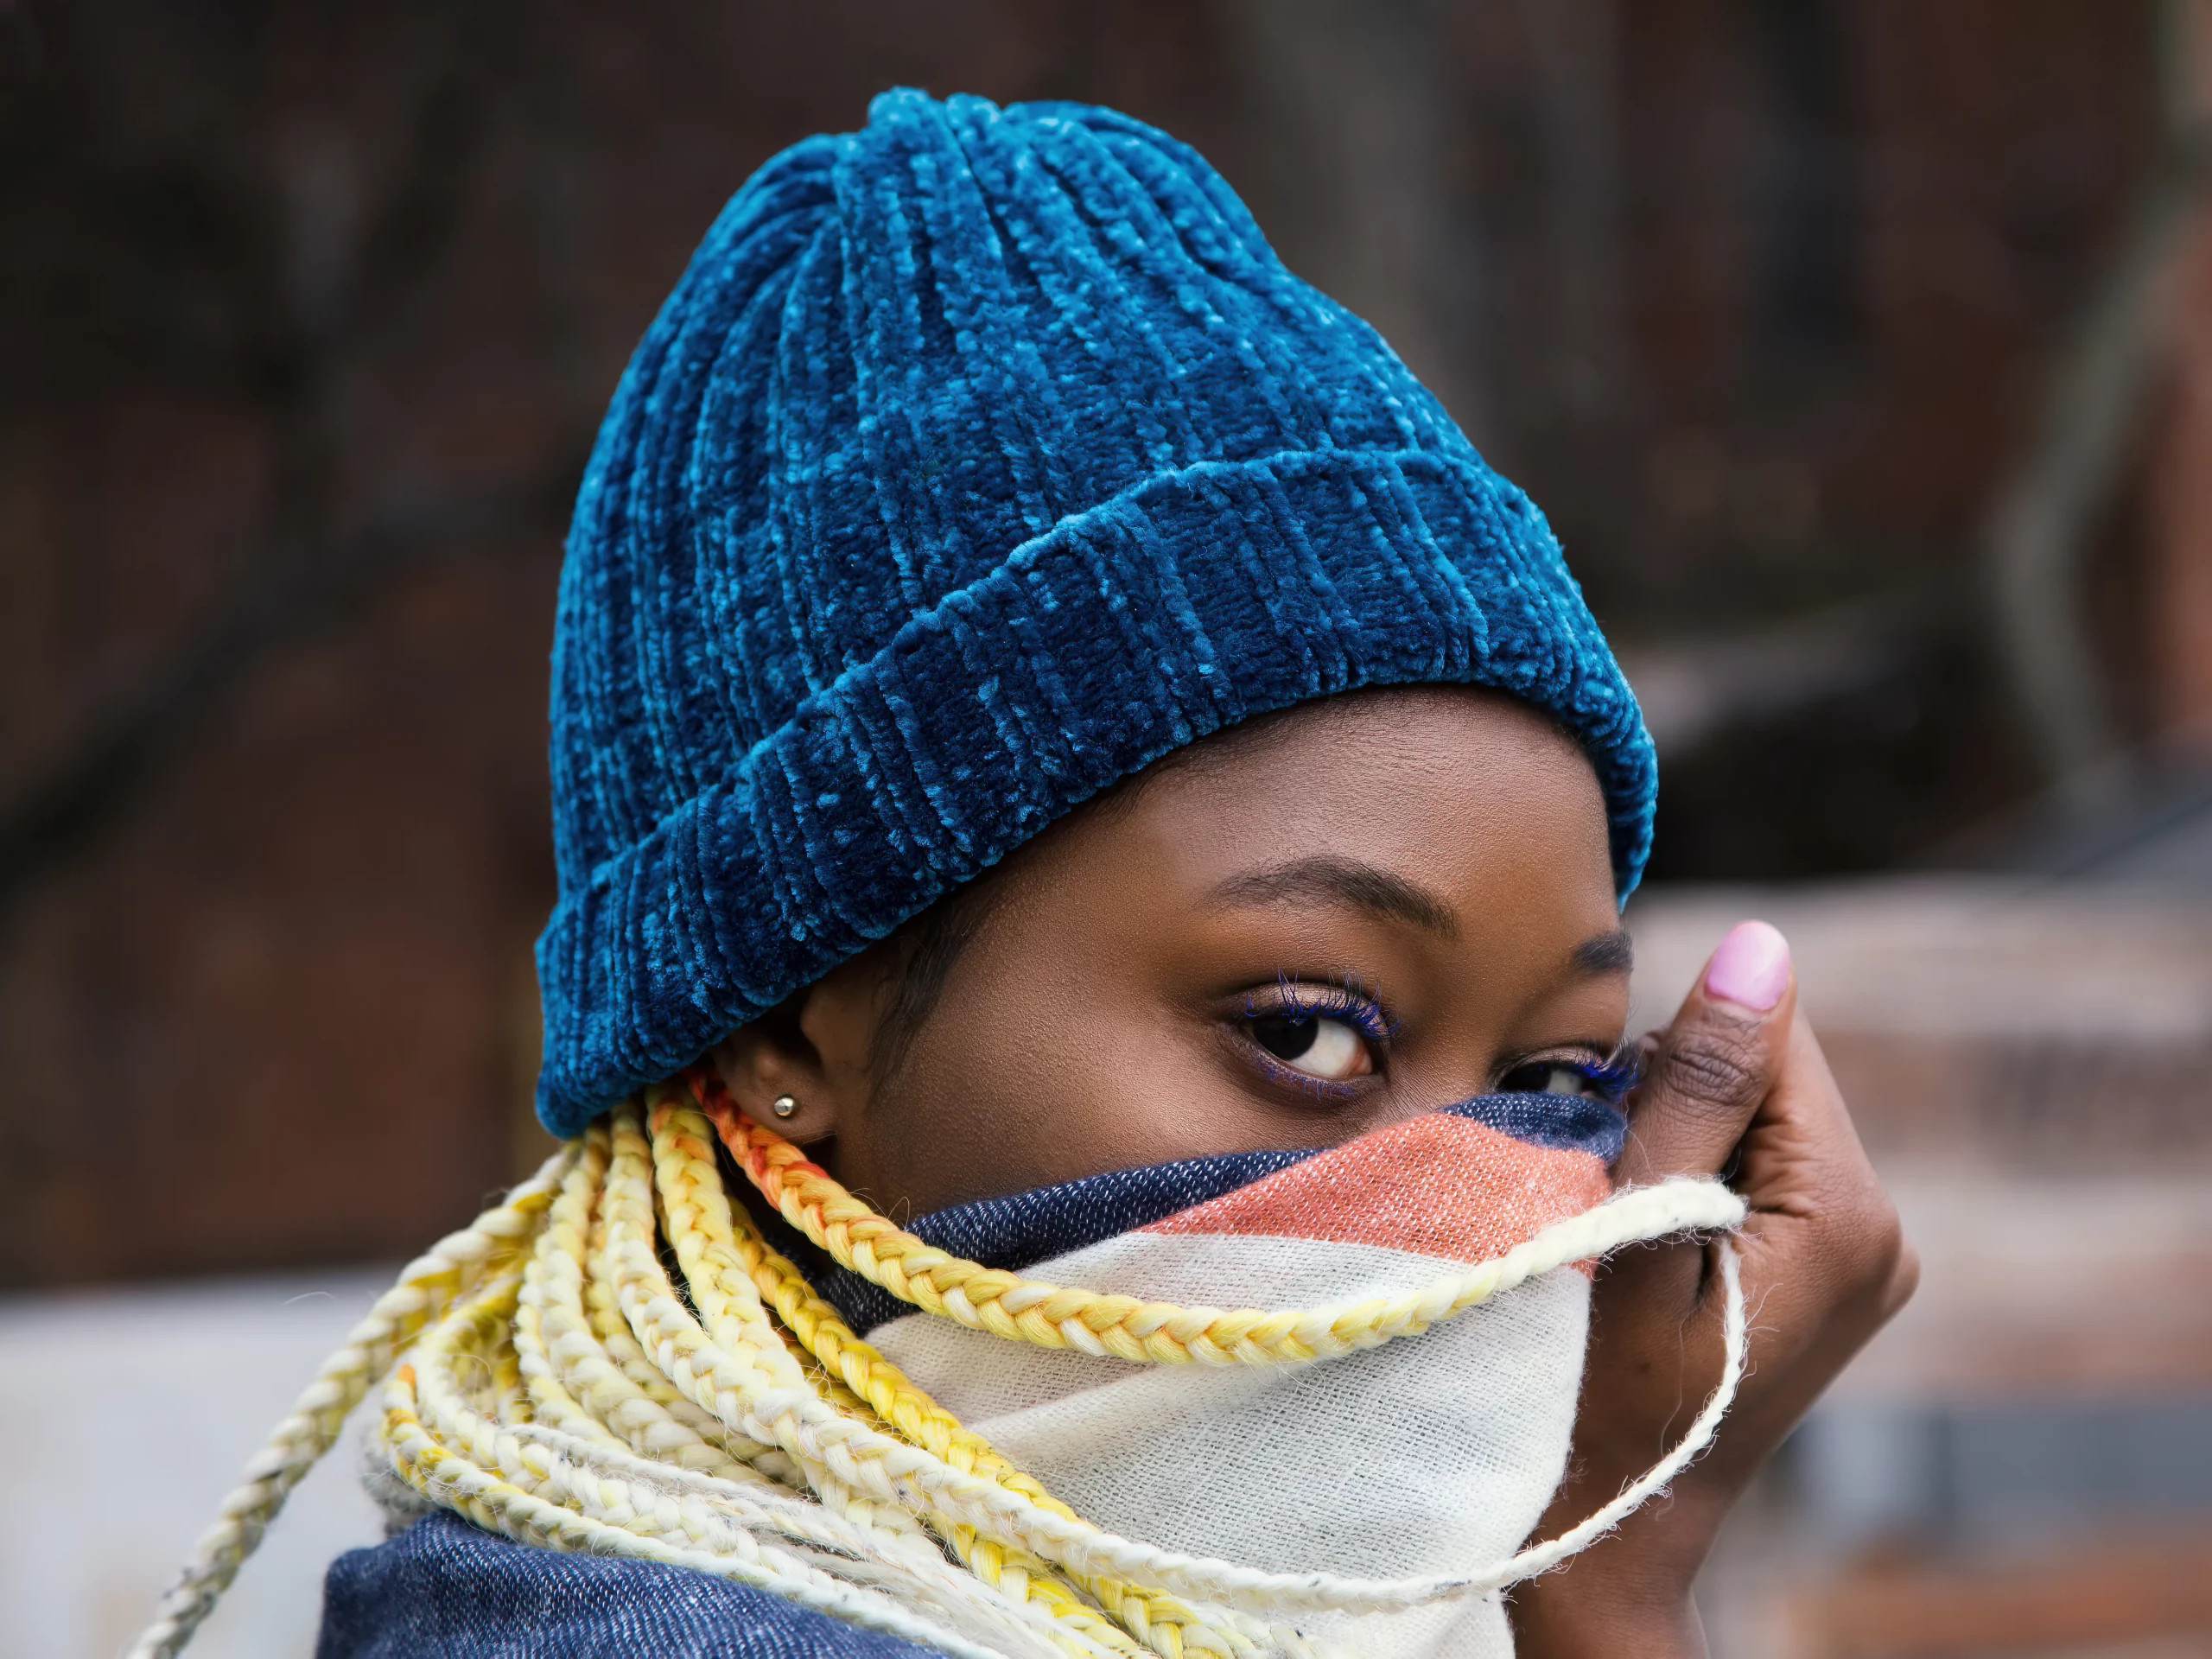 Black woman cover her face wearing blue beanie